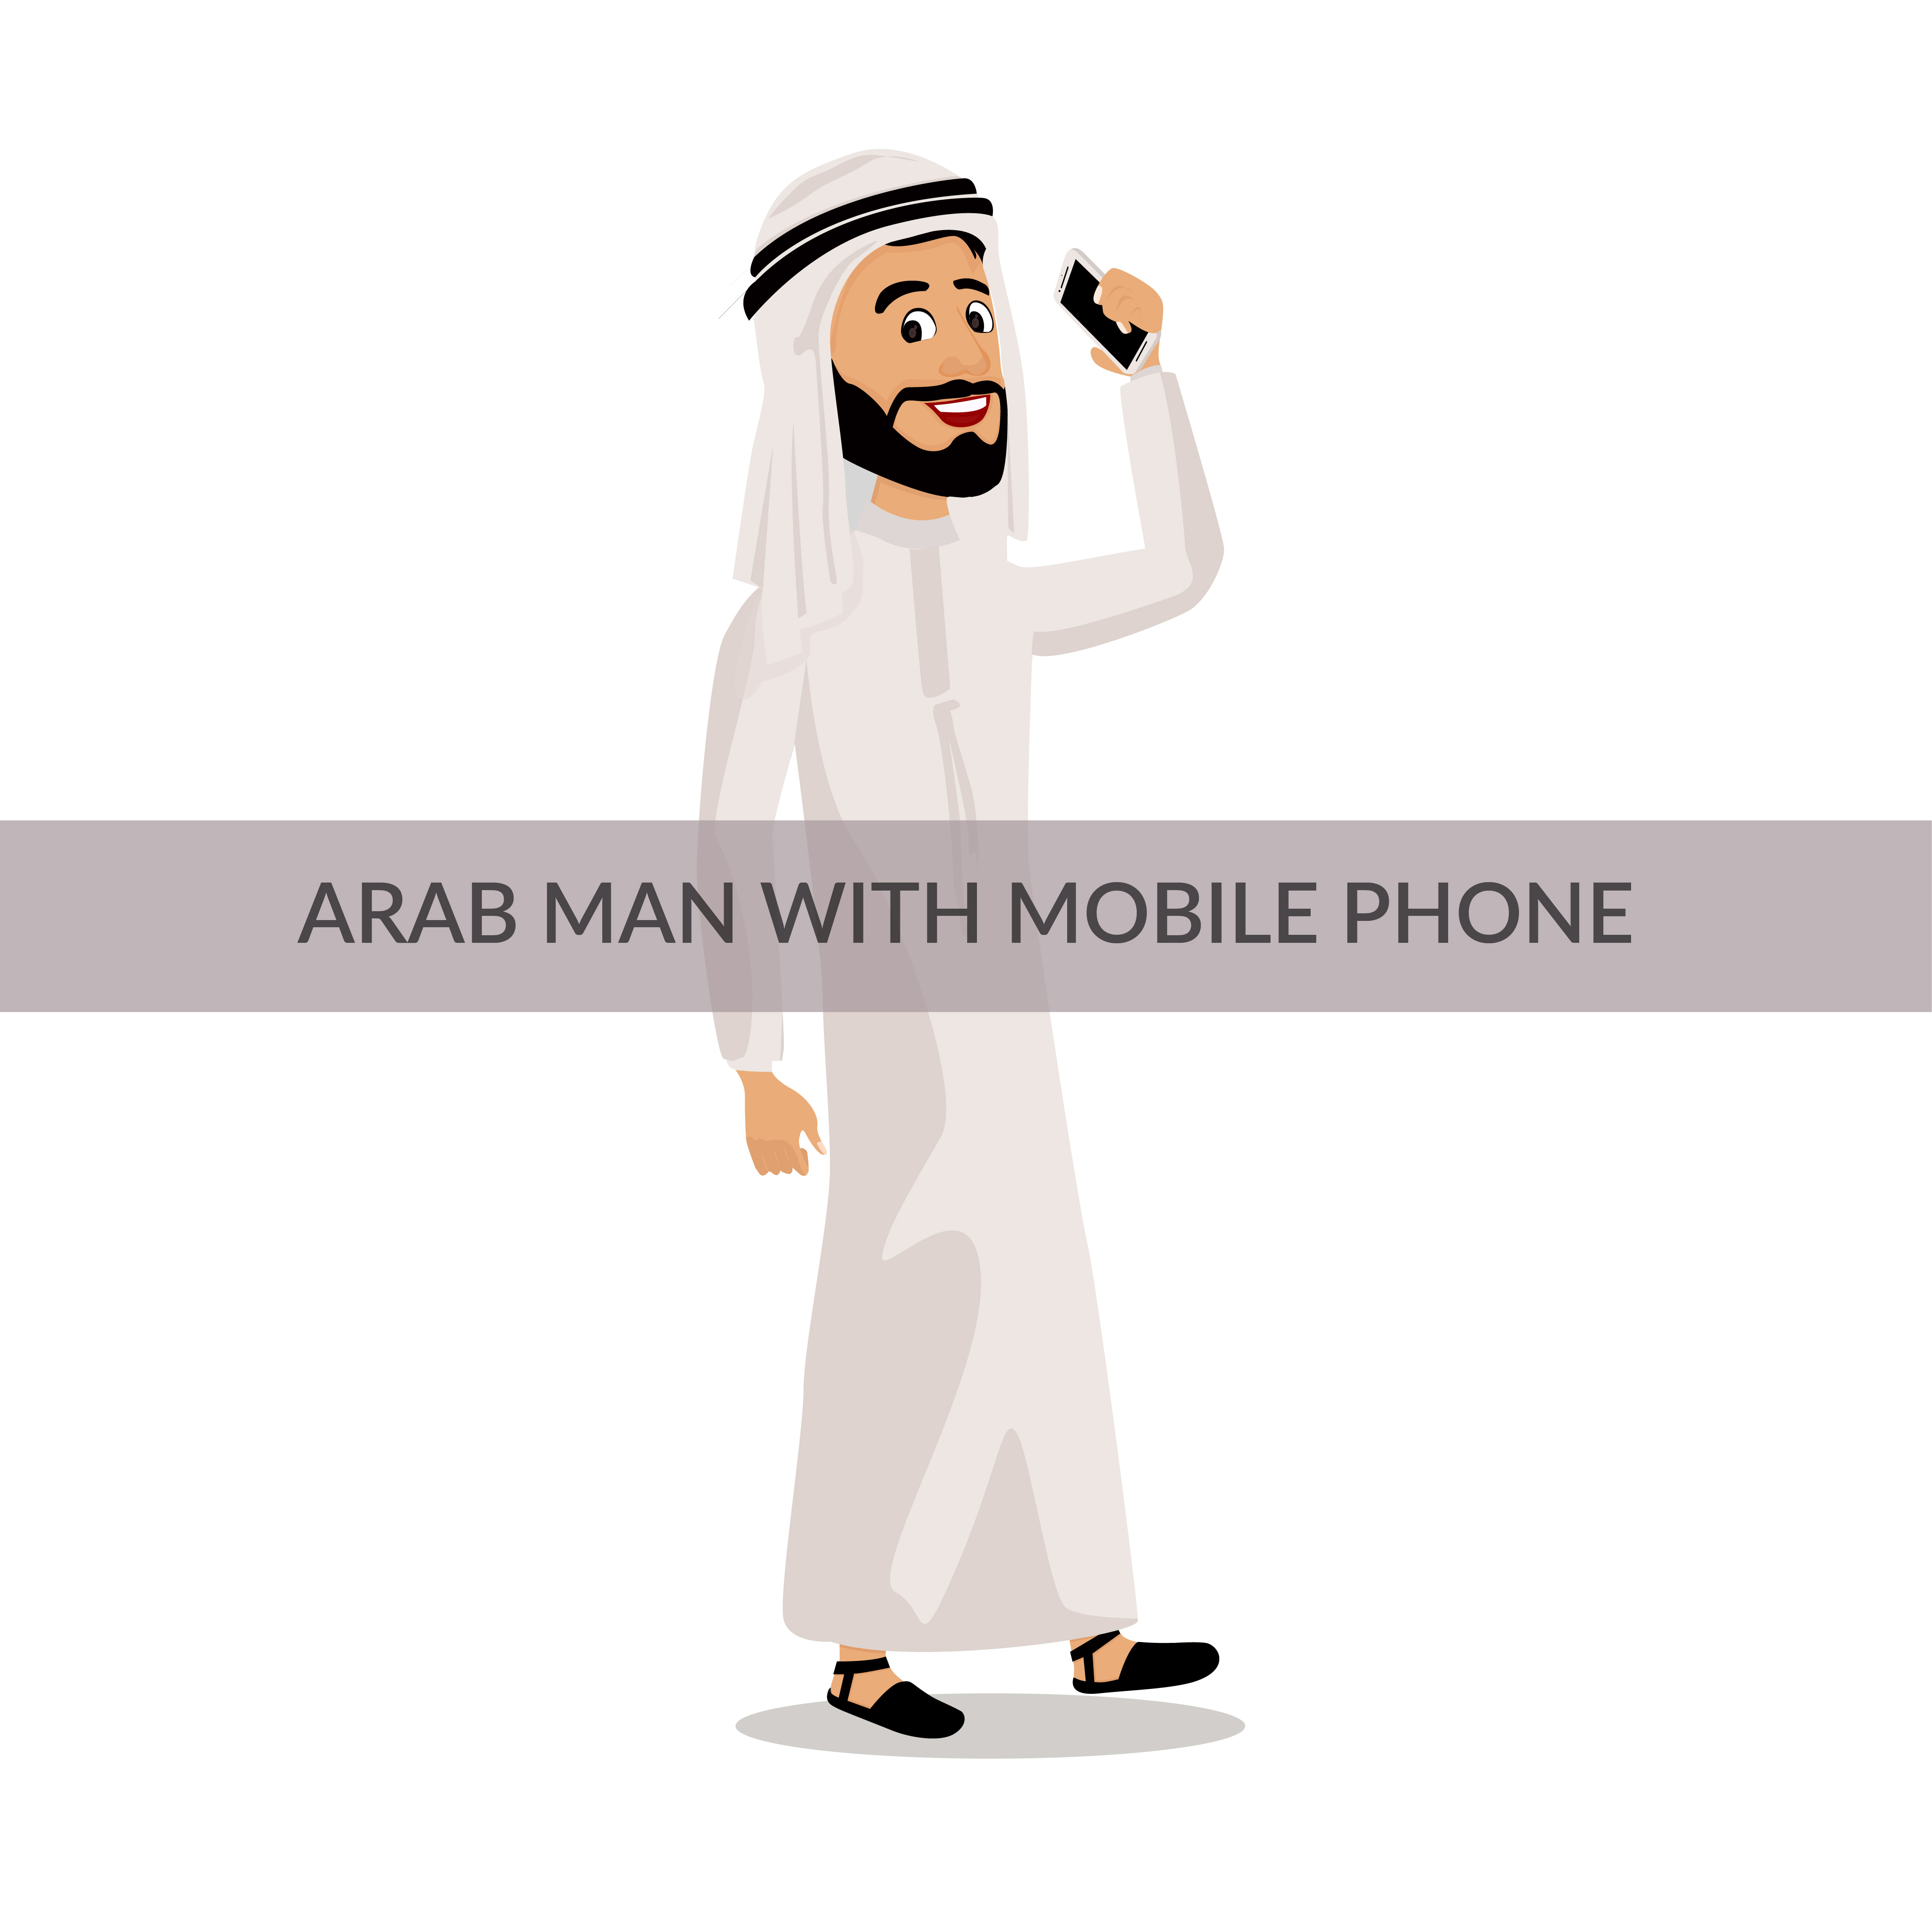 Arab man character with mobile phone preview image.